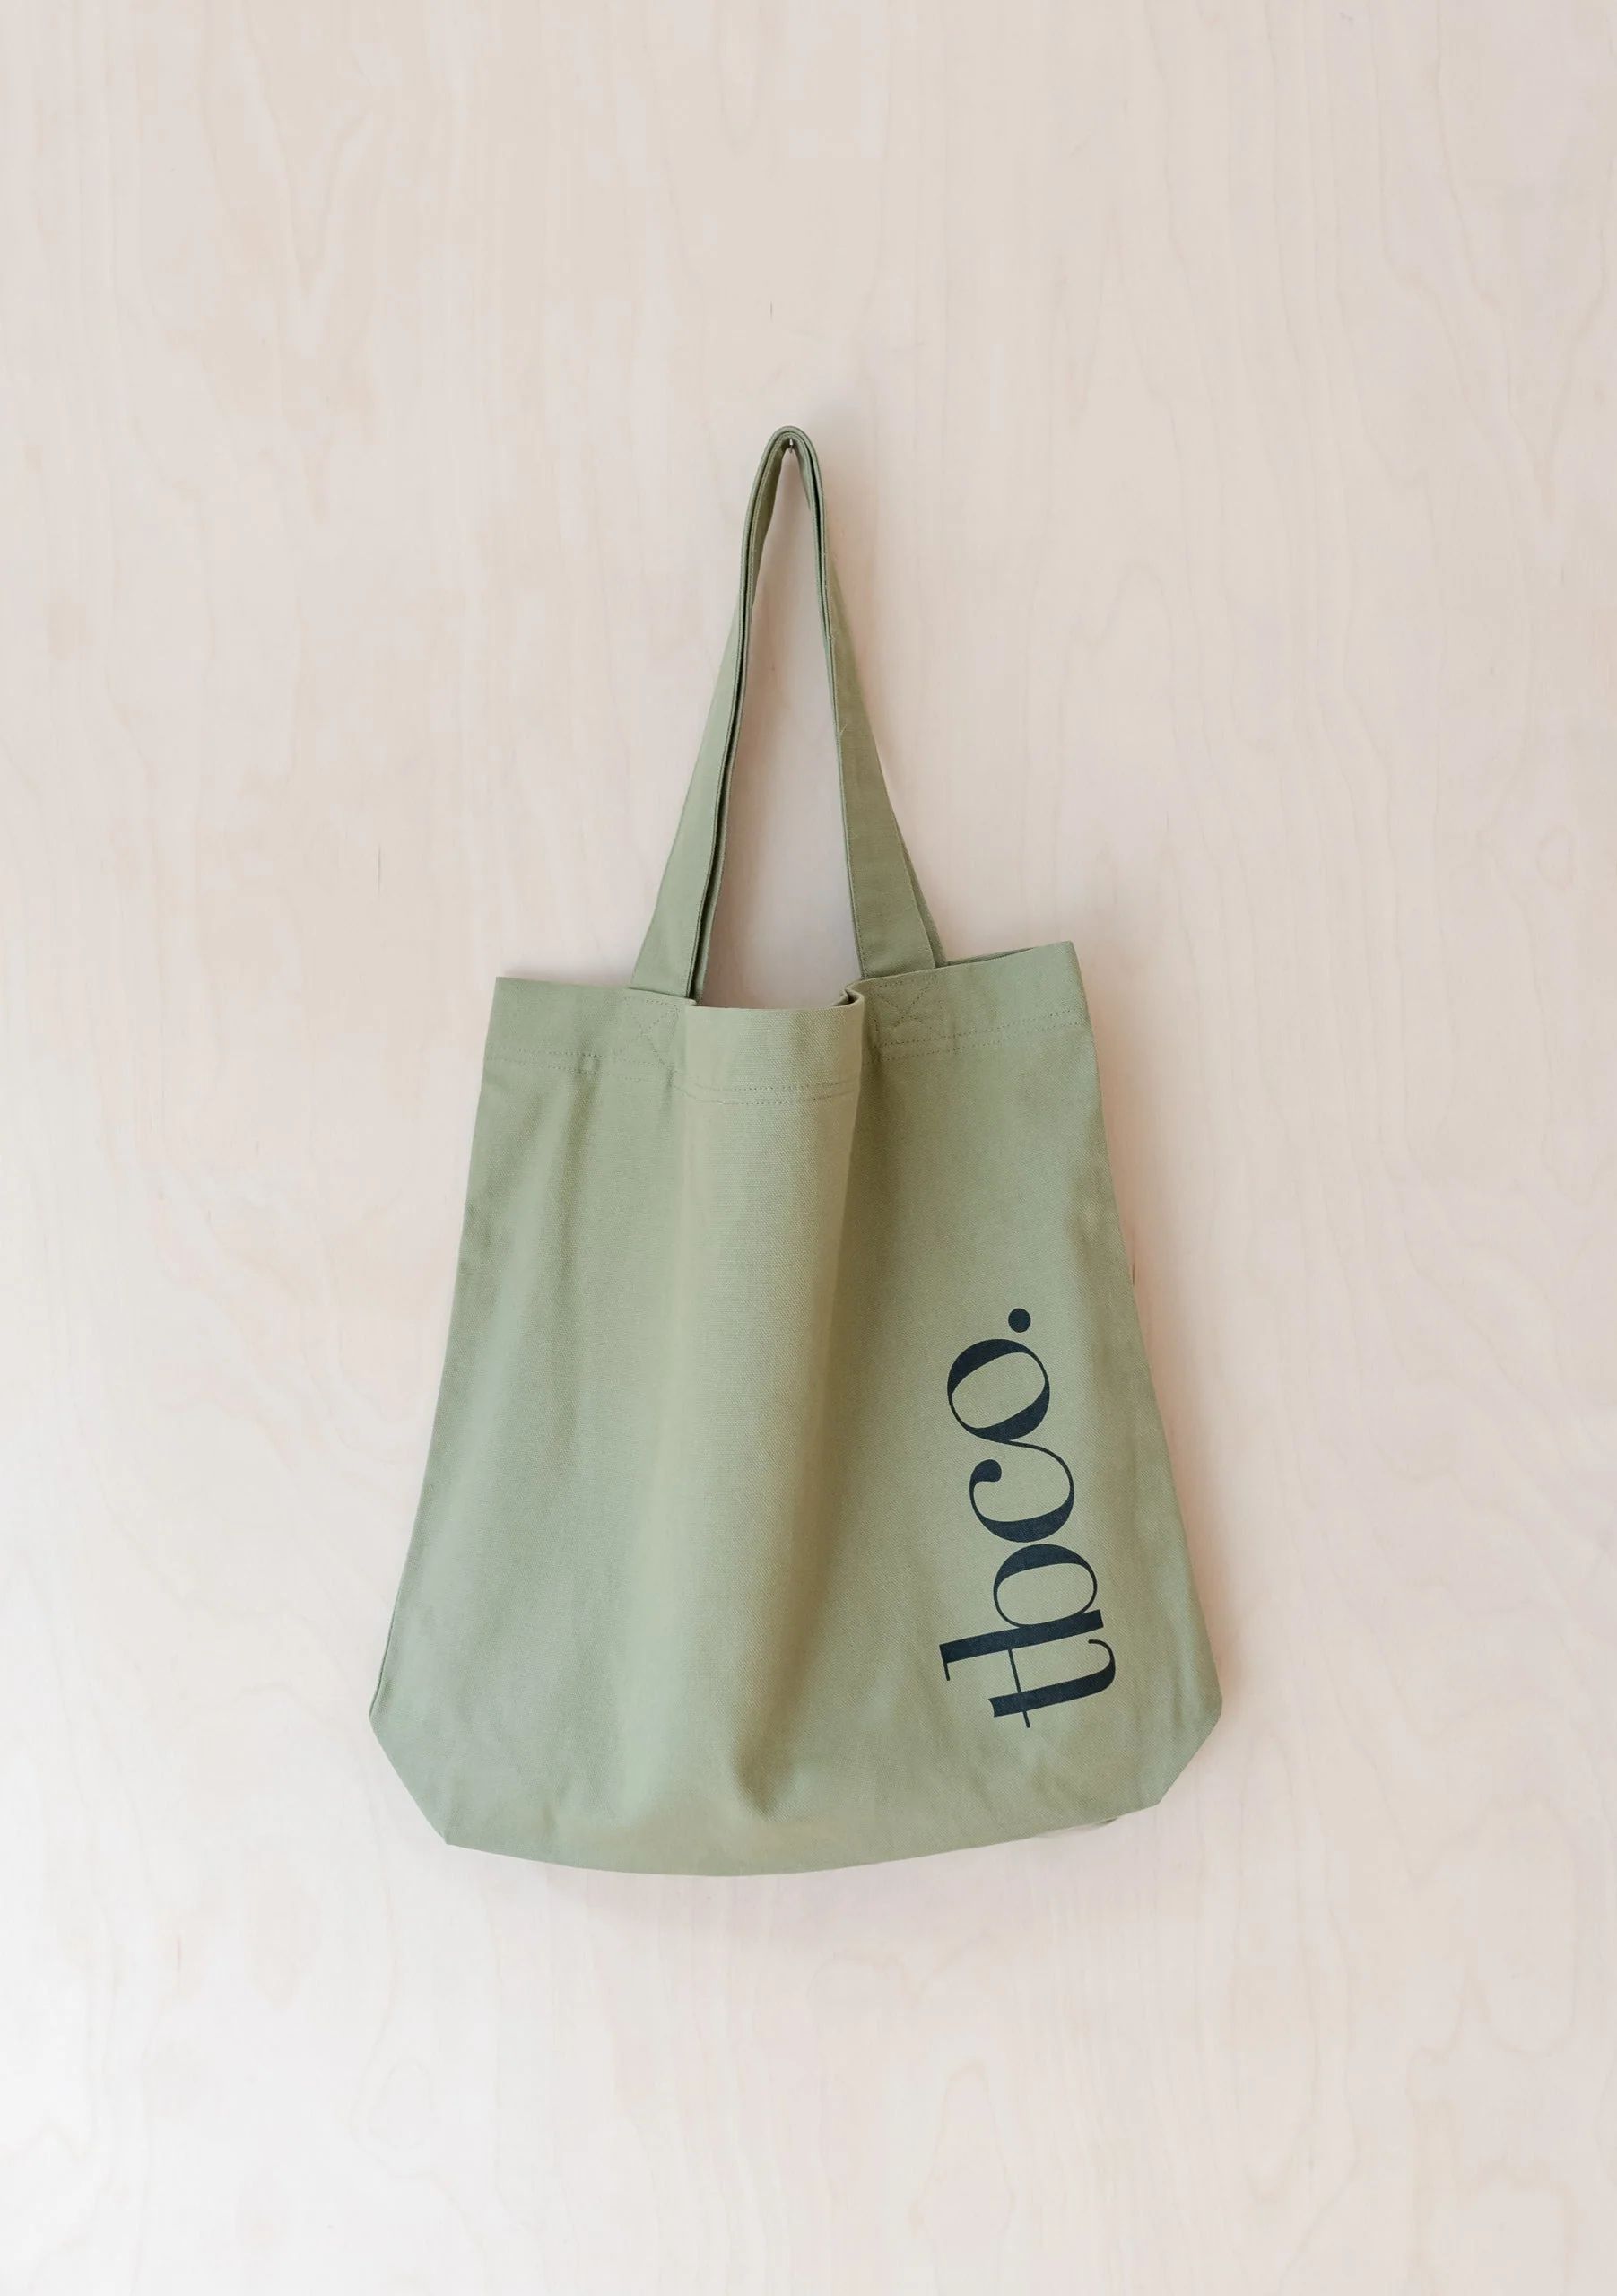 TBCo Recycled Cotton Tote in Olive | The Tartan Blanket Co.